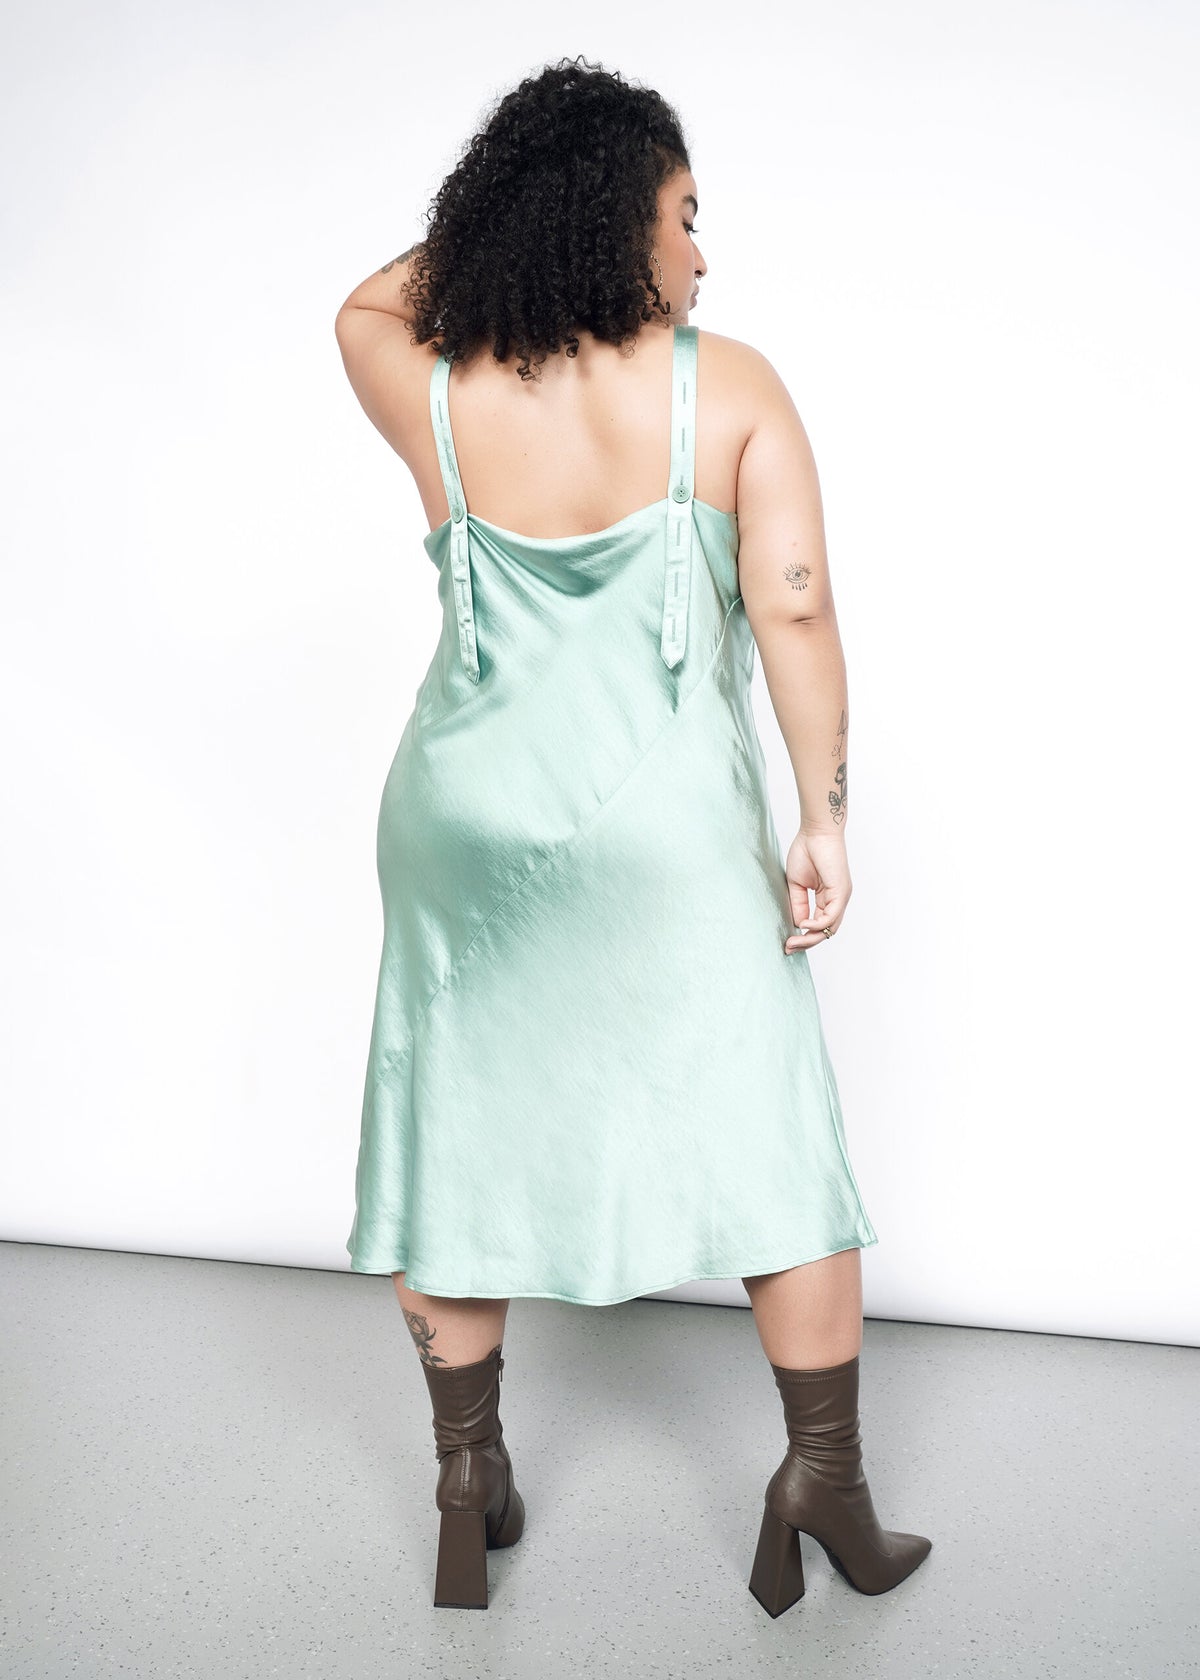 Back image of Model wearing the Empower Satin Slip Dress in Sage in size 1X with heeled ankle boots.